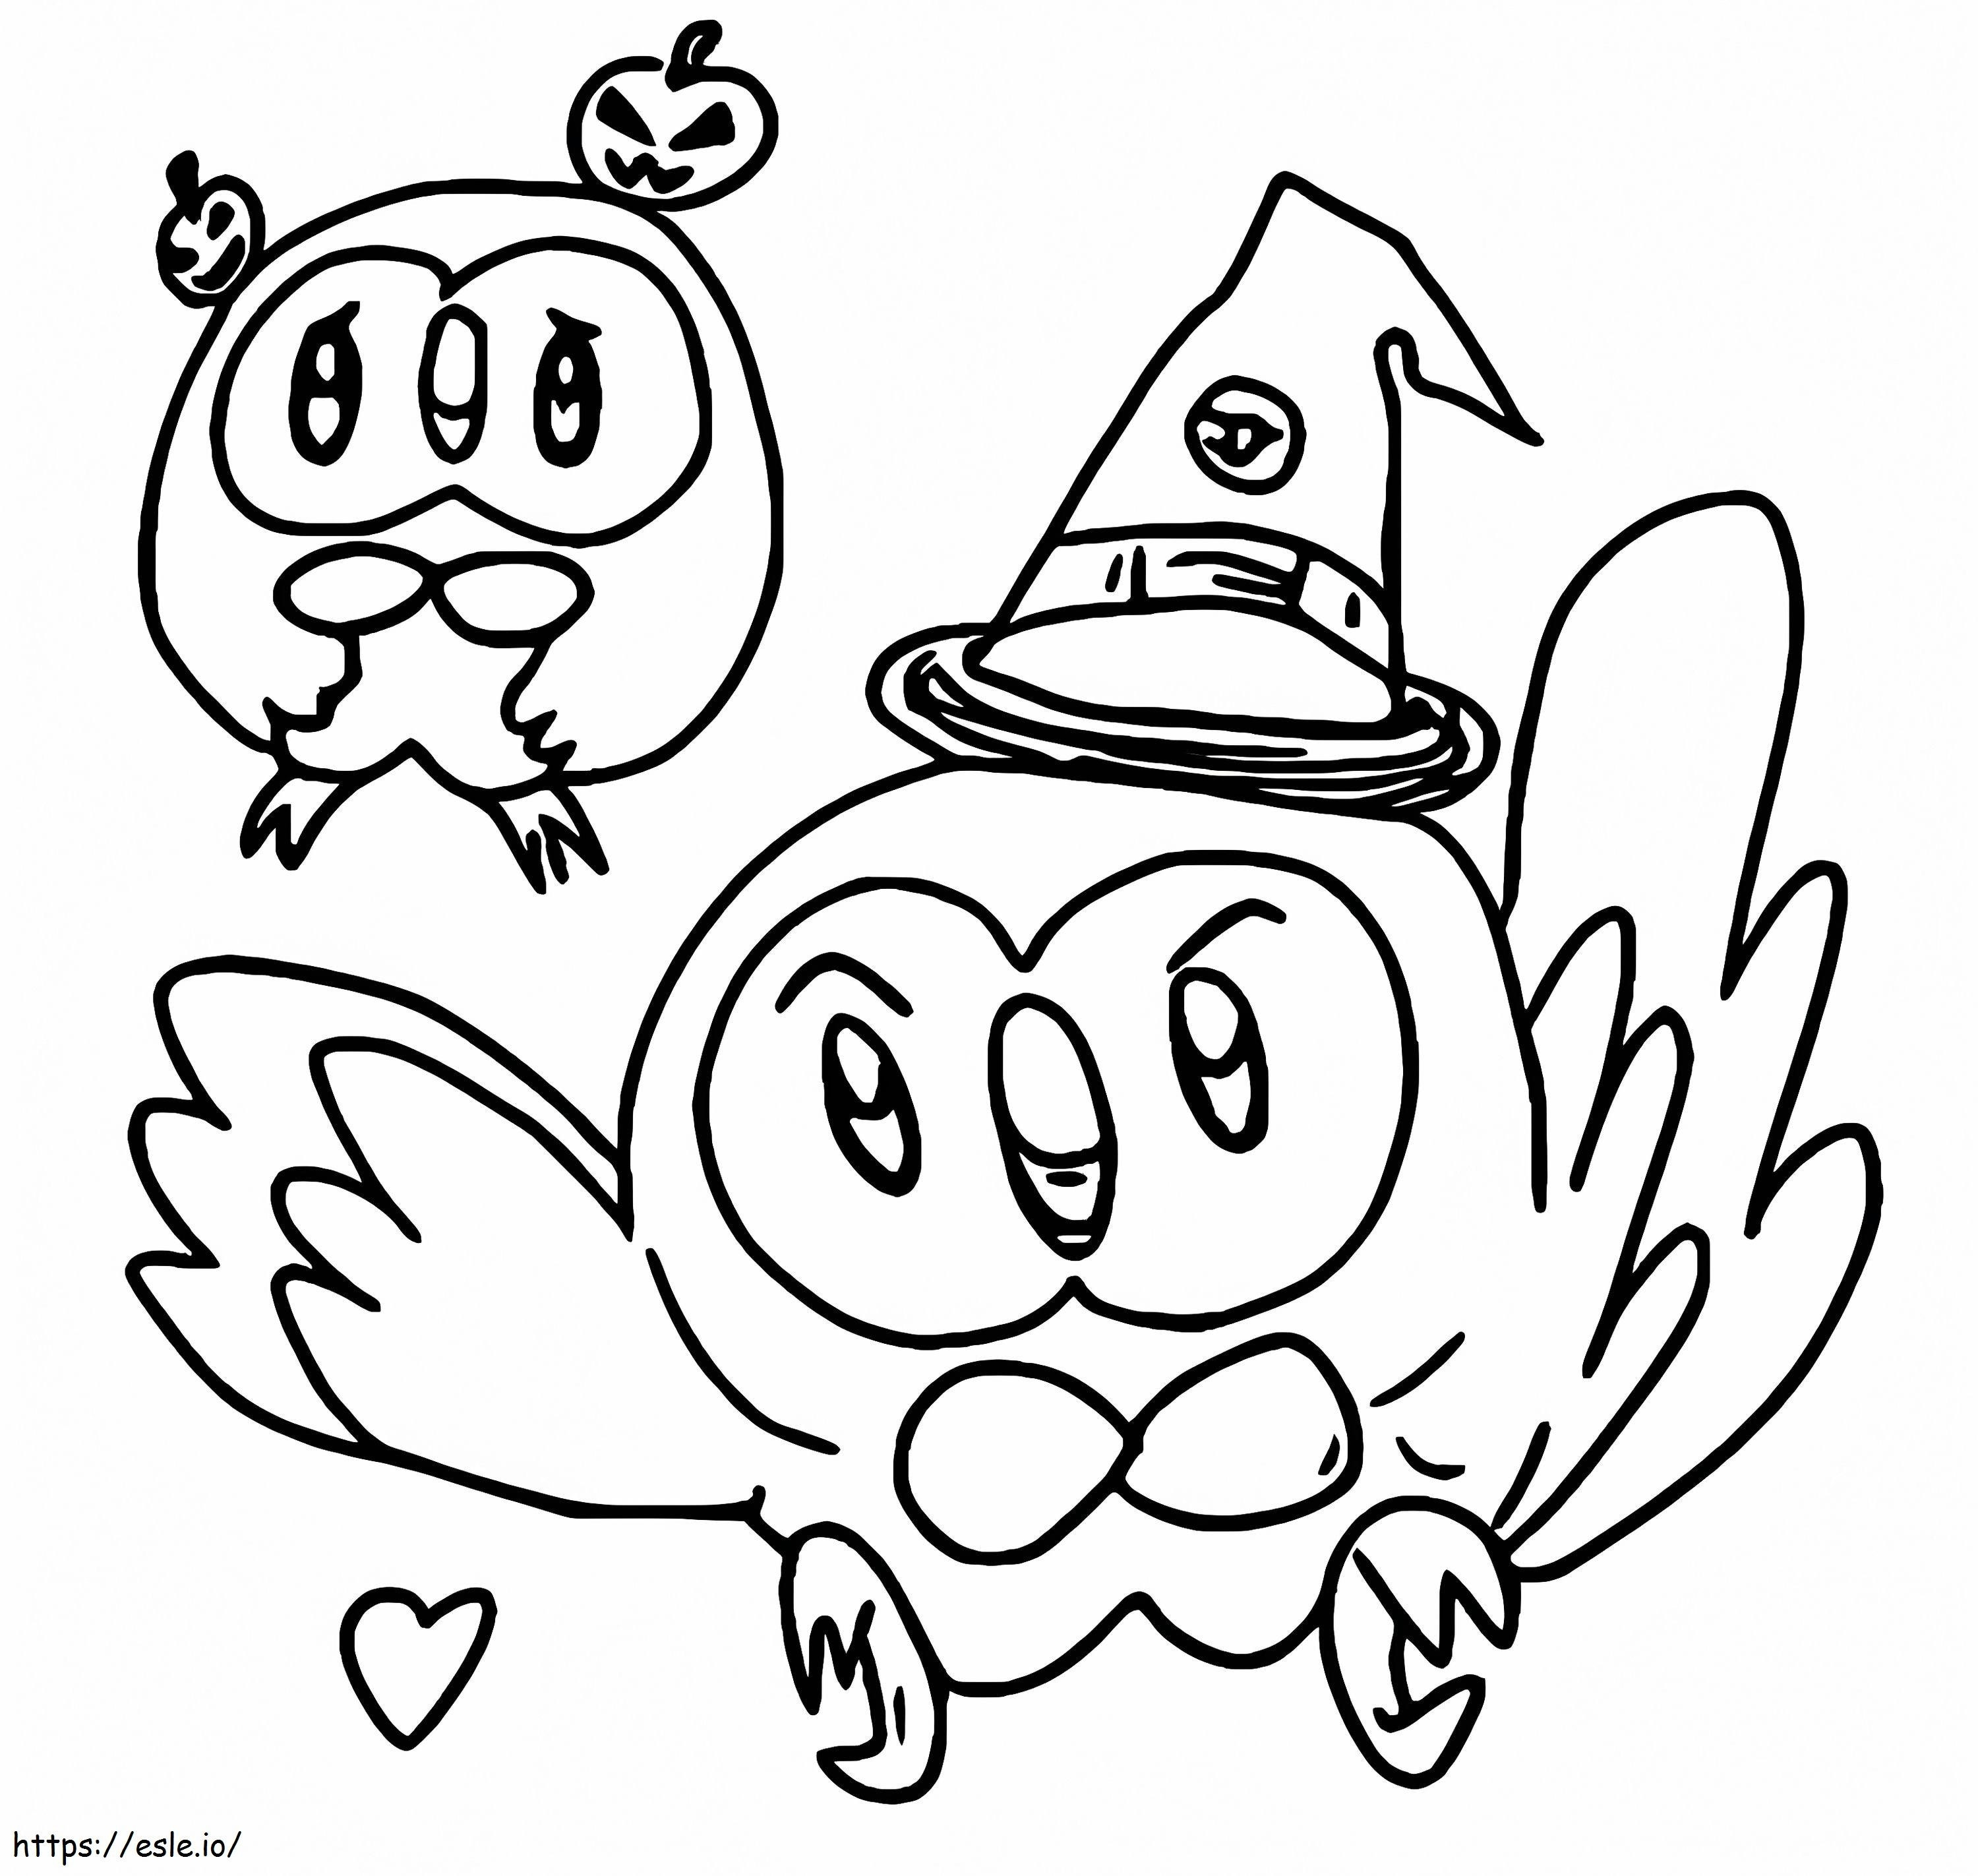 Halloween Rowlet coloring page